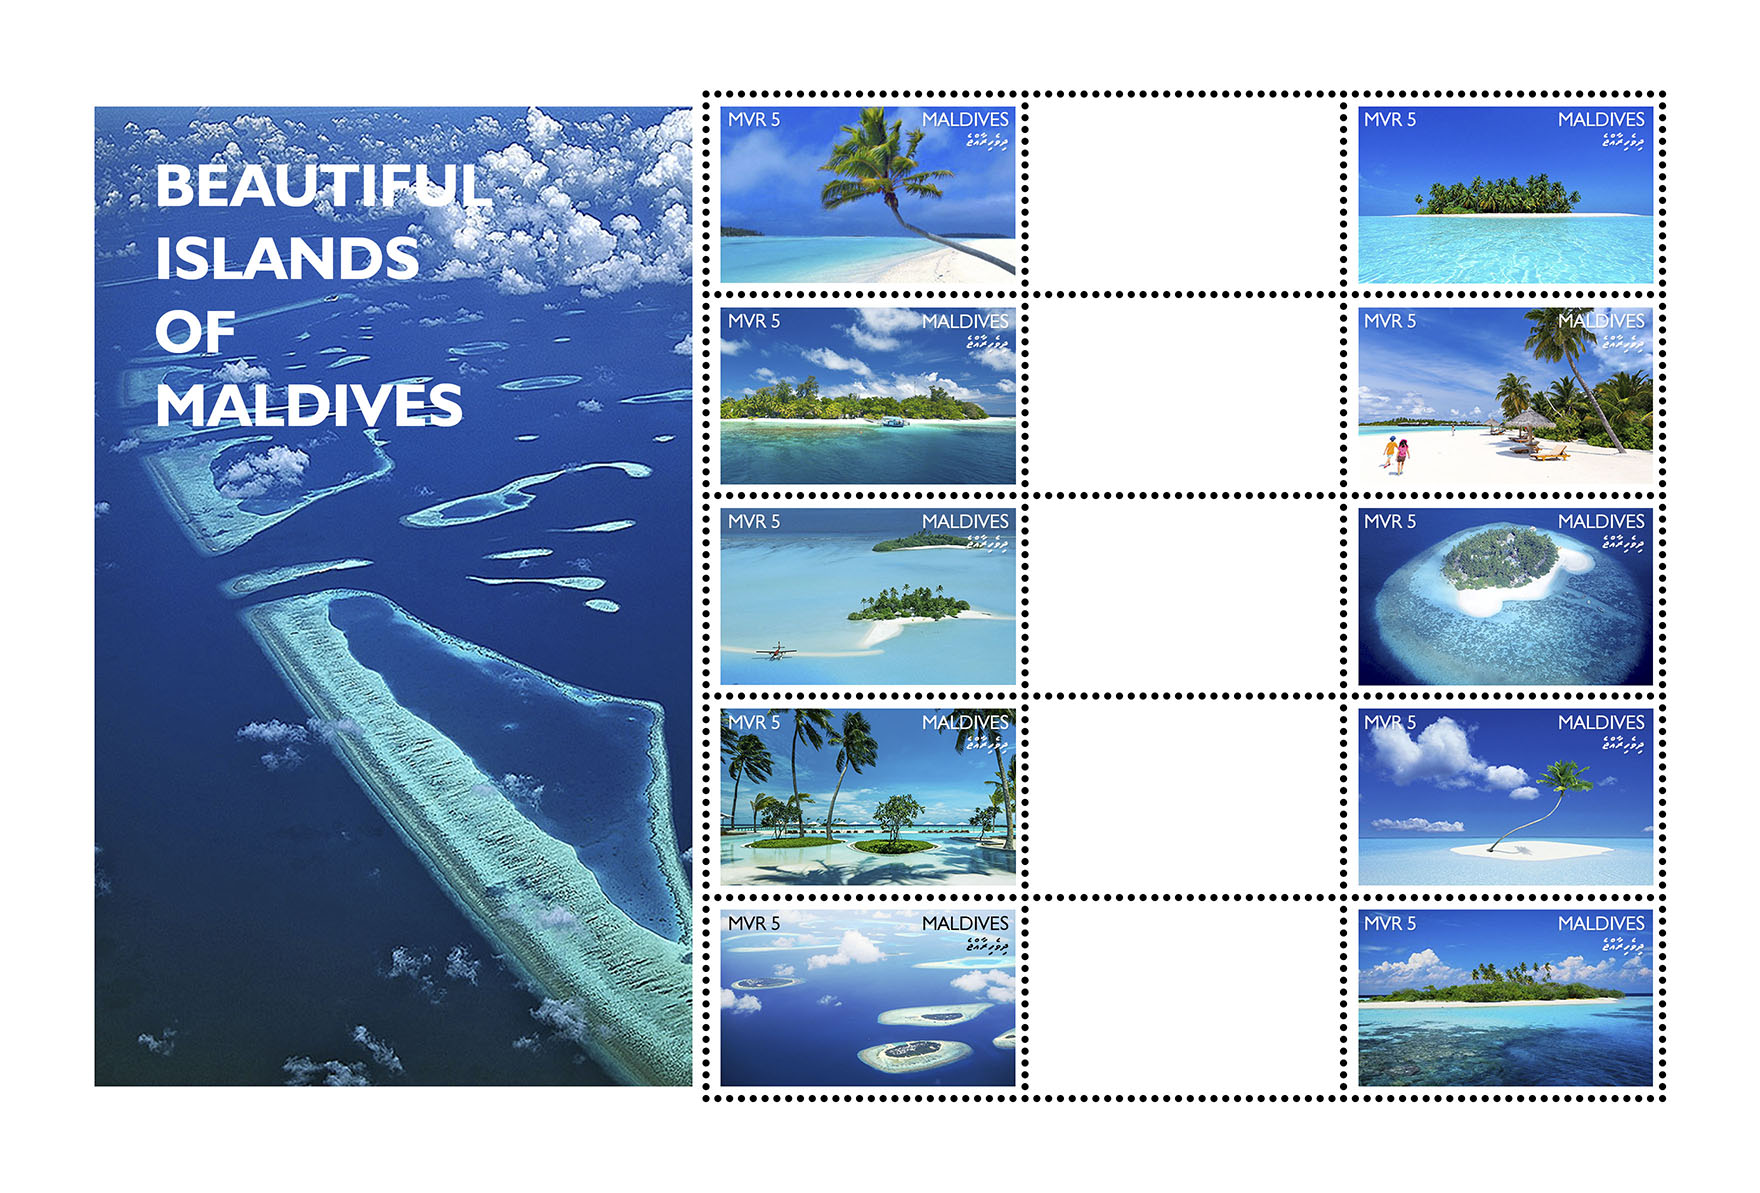 Beautiful Islands of Maldives - Issue of Maldives postage stamps